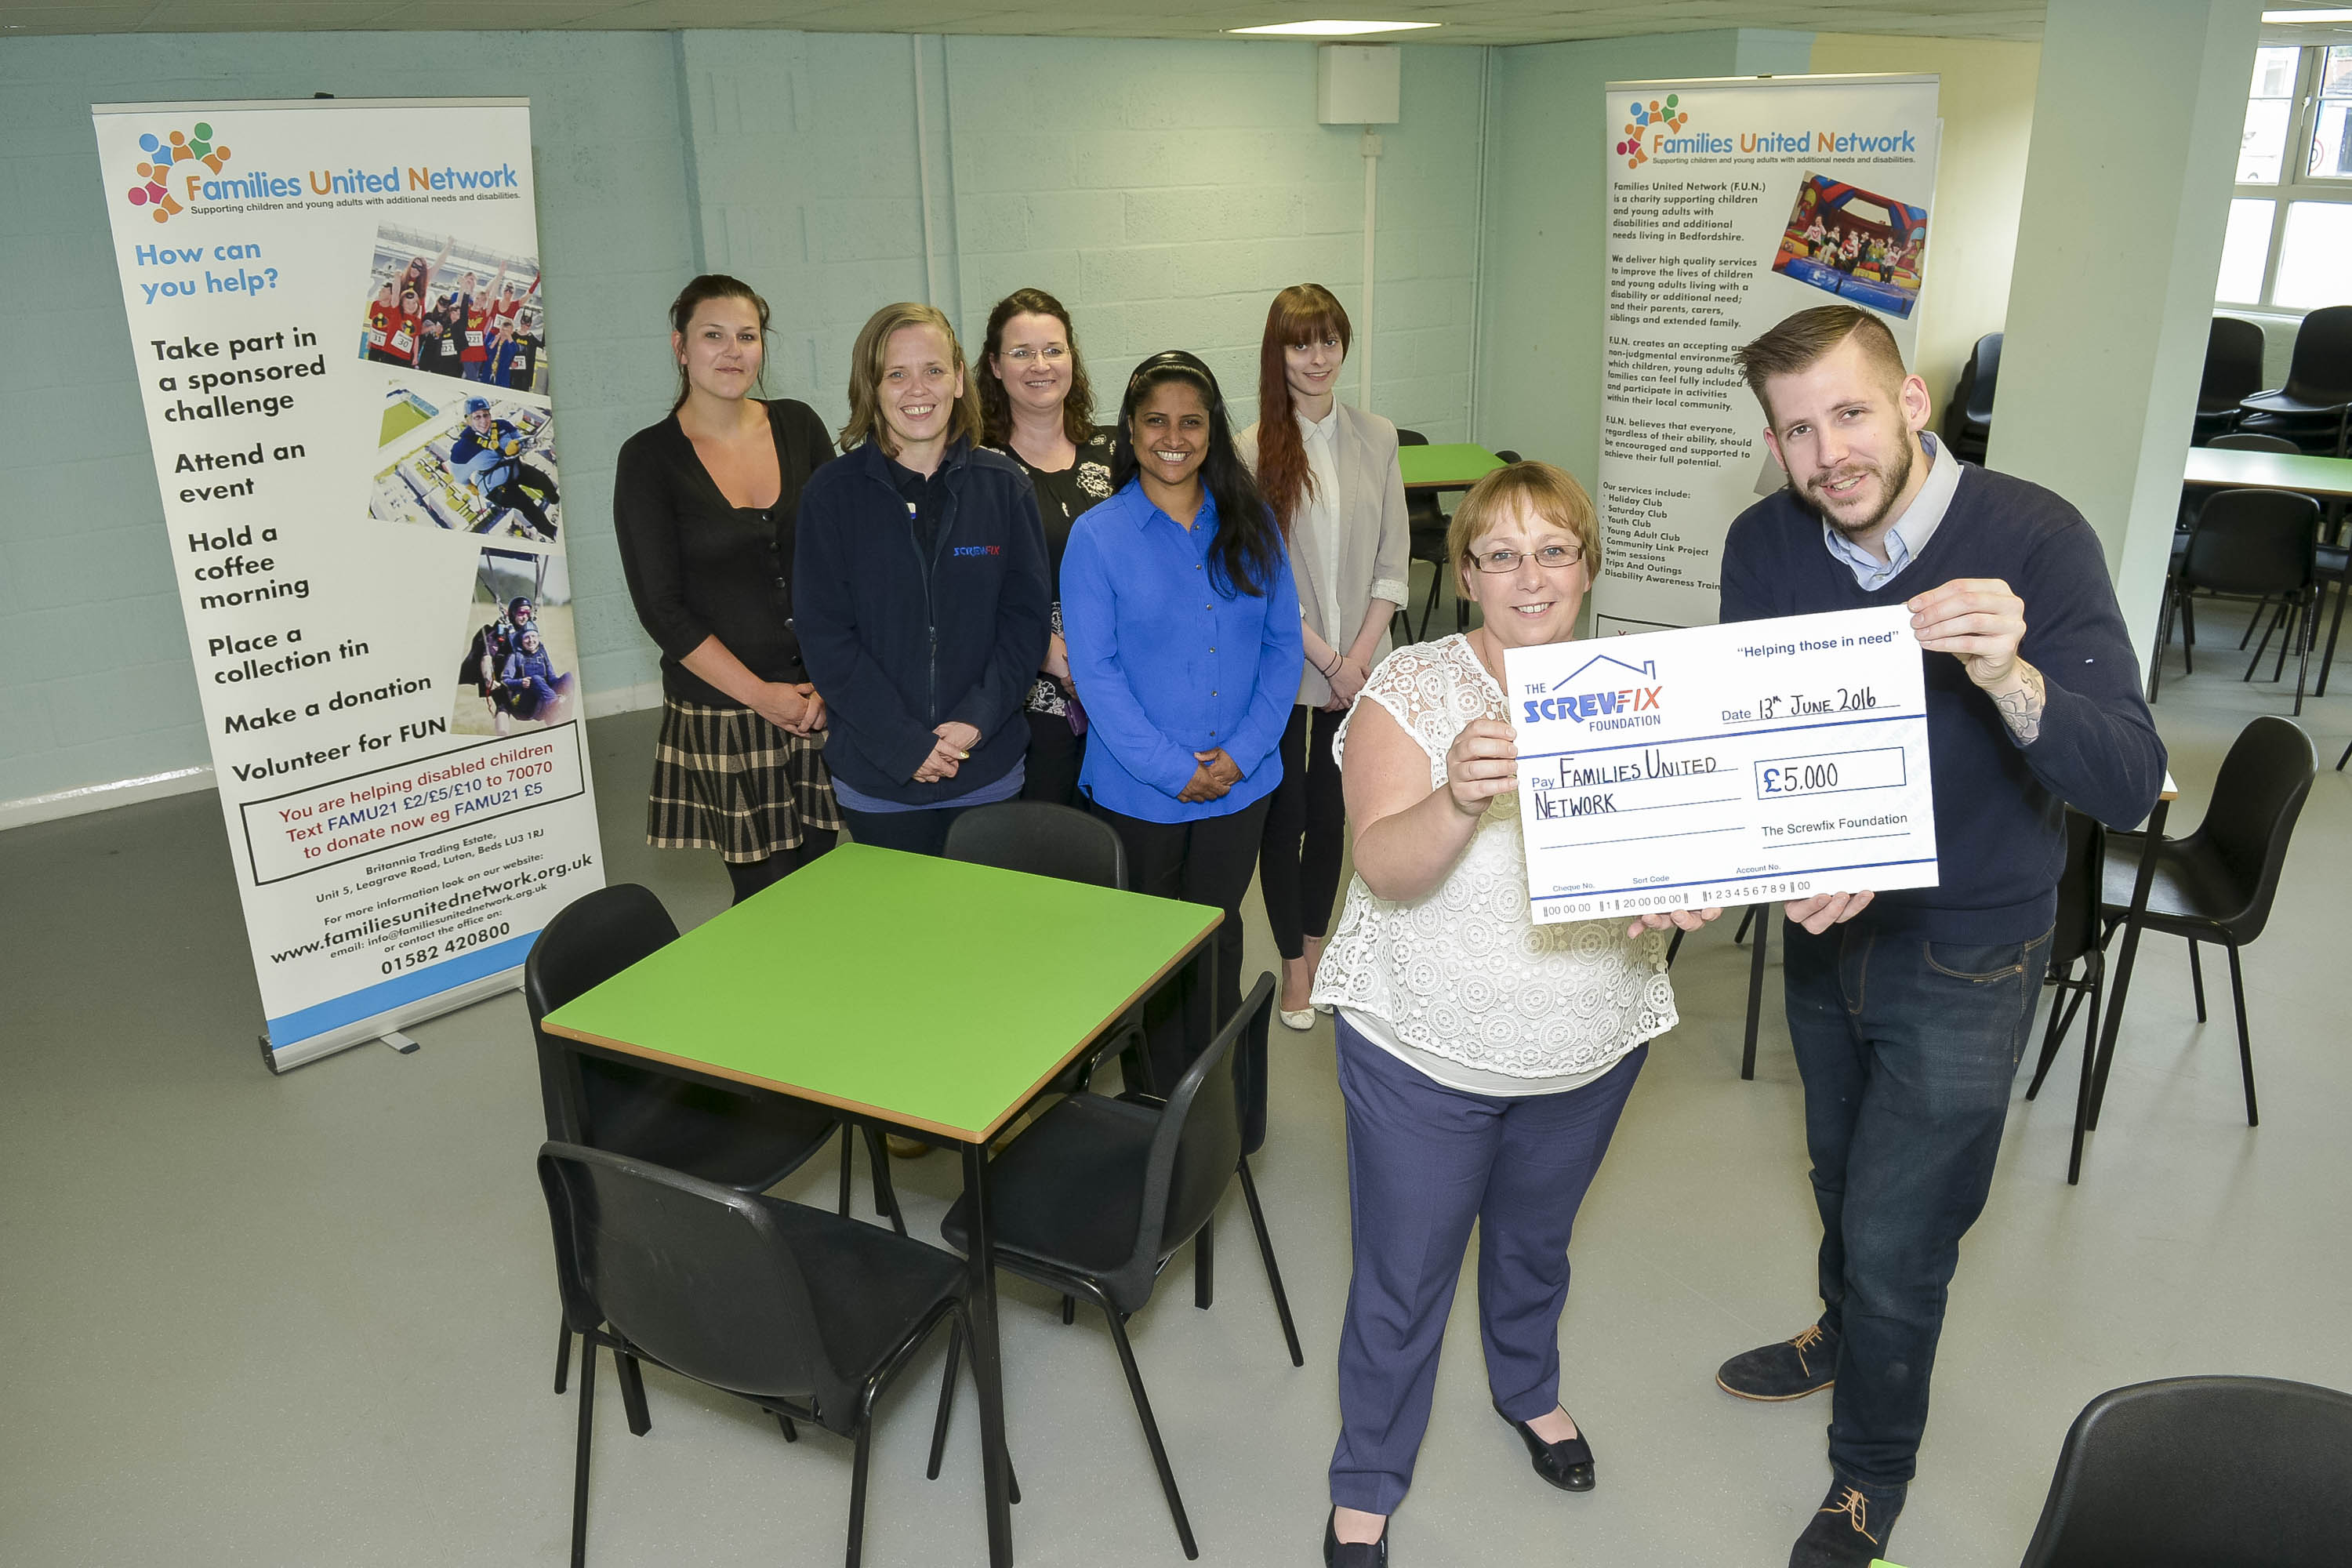 Luton based charity gets a helping hand from the Screwfix Foundation